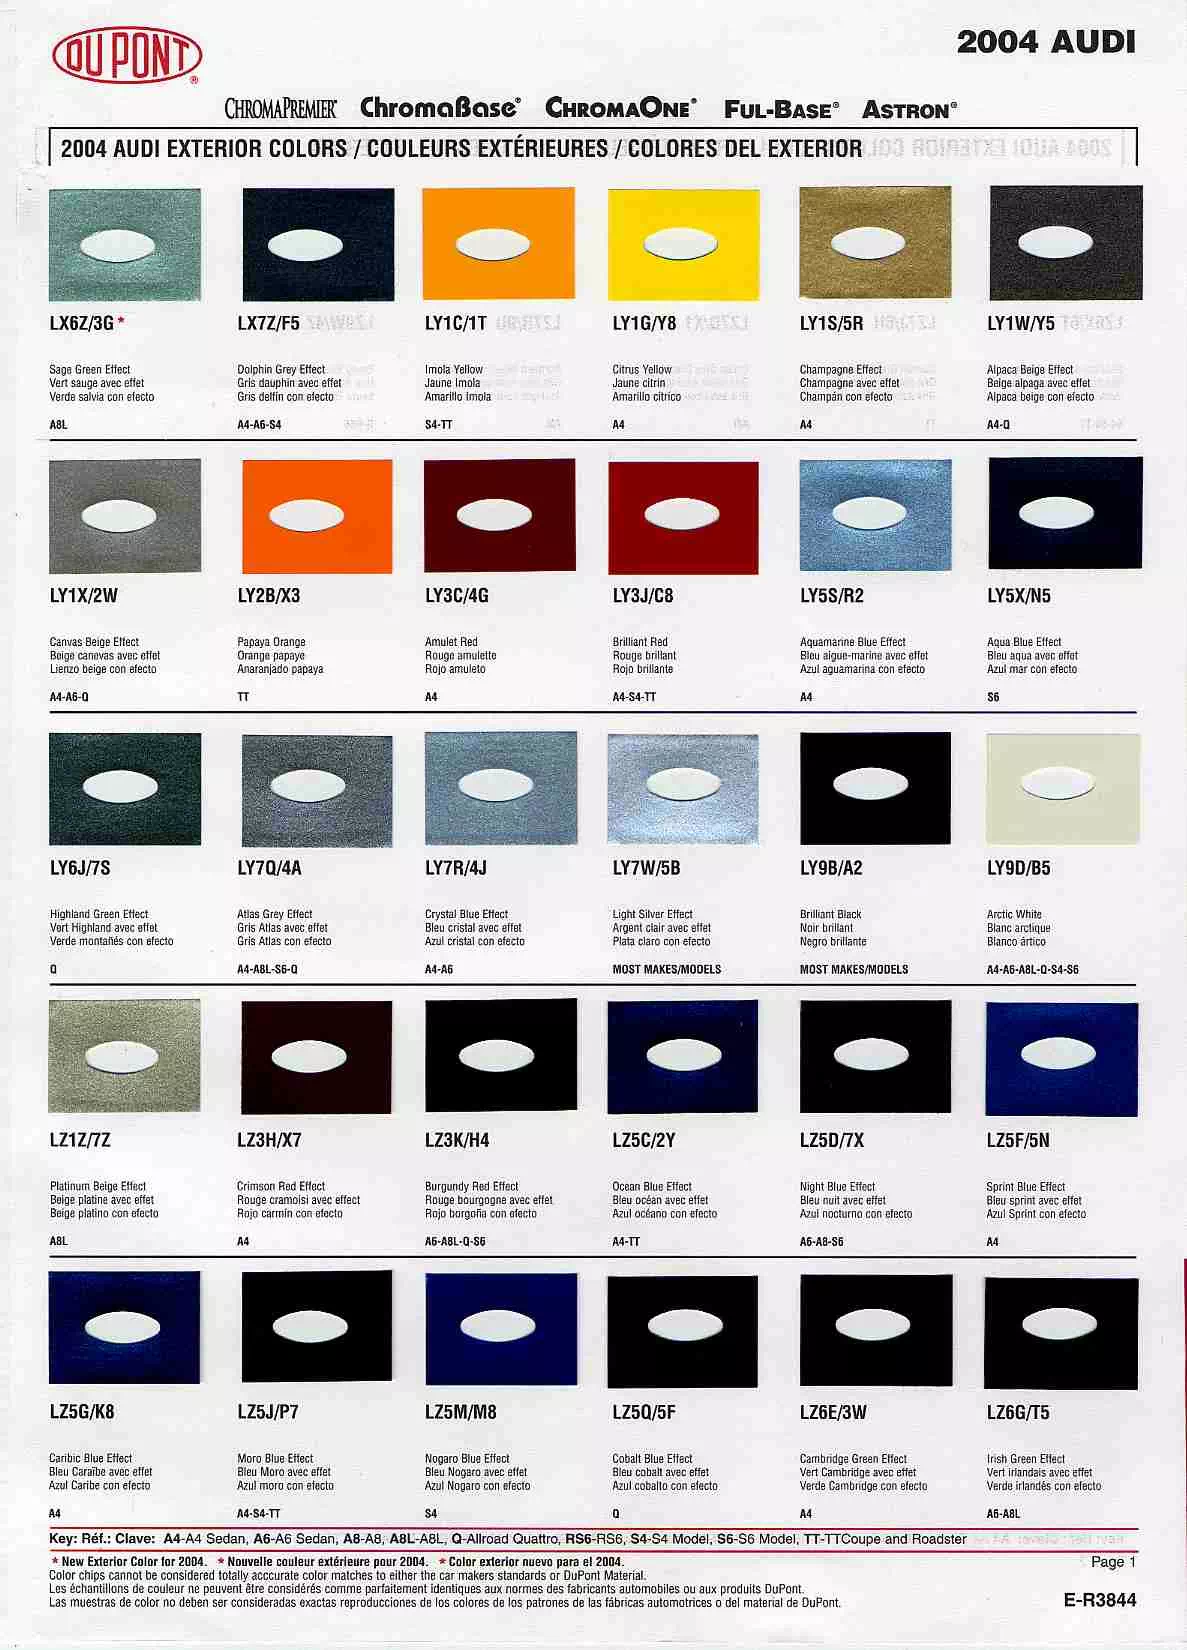 Audi exterior paint codes and their colors used on their vehicles